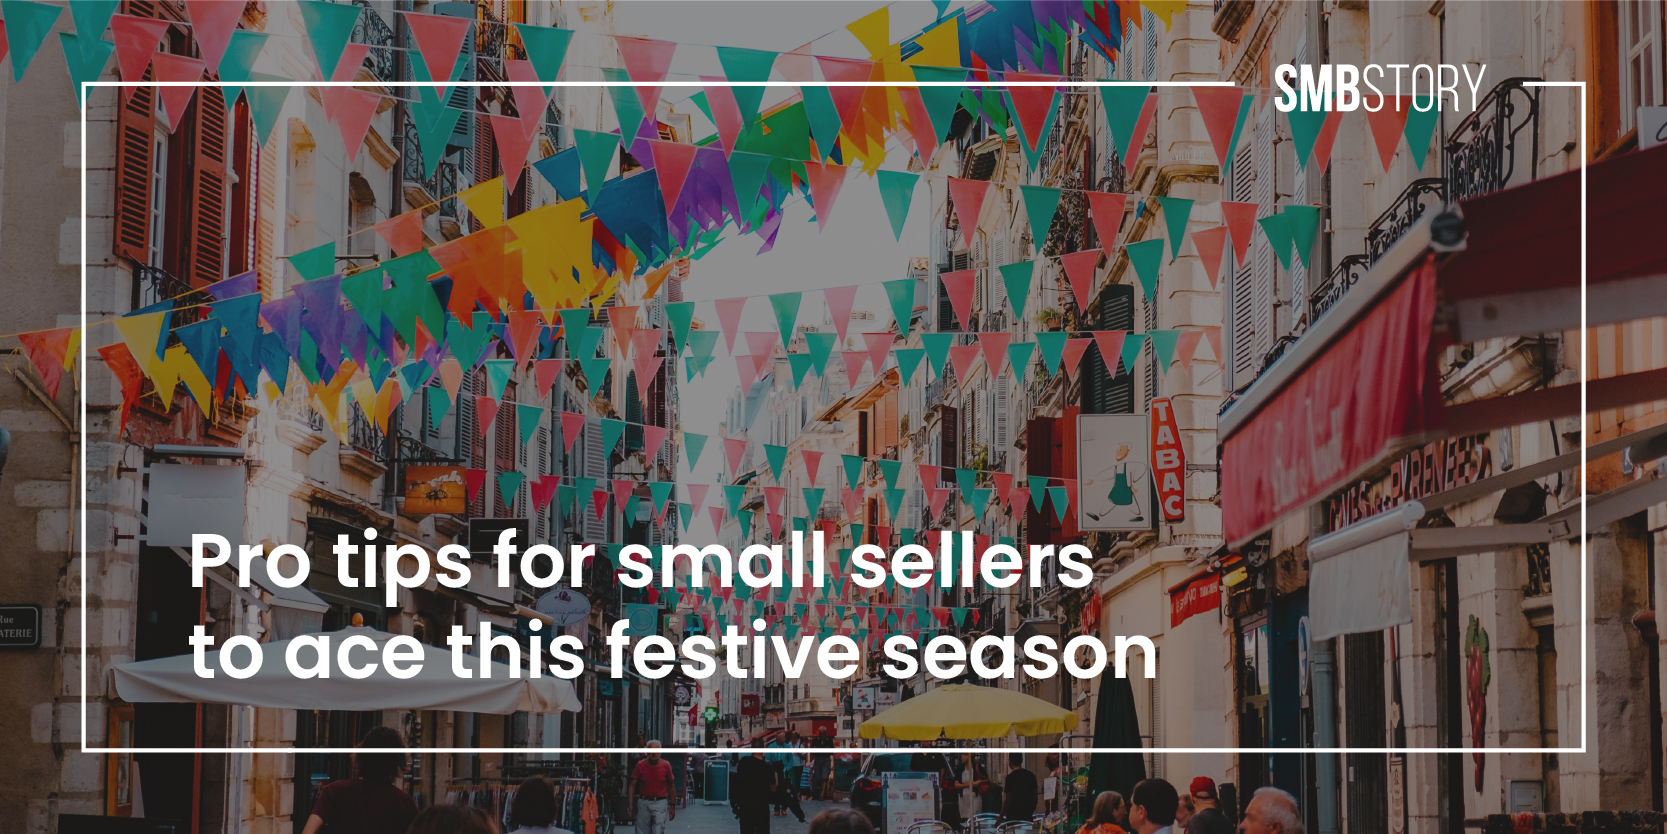 5 tips and tricks that small sellers can use to ace ecommerce this festive season